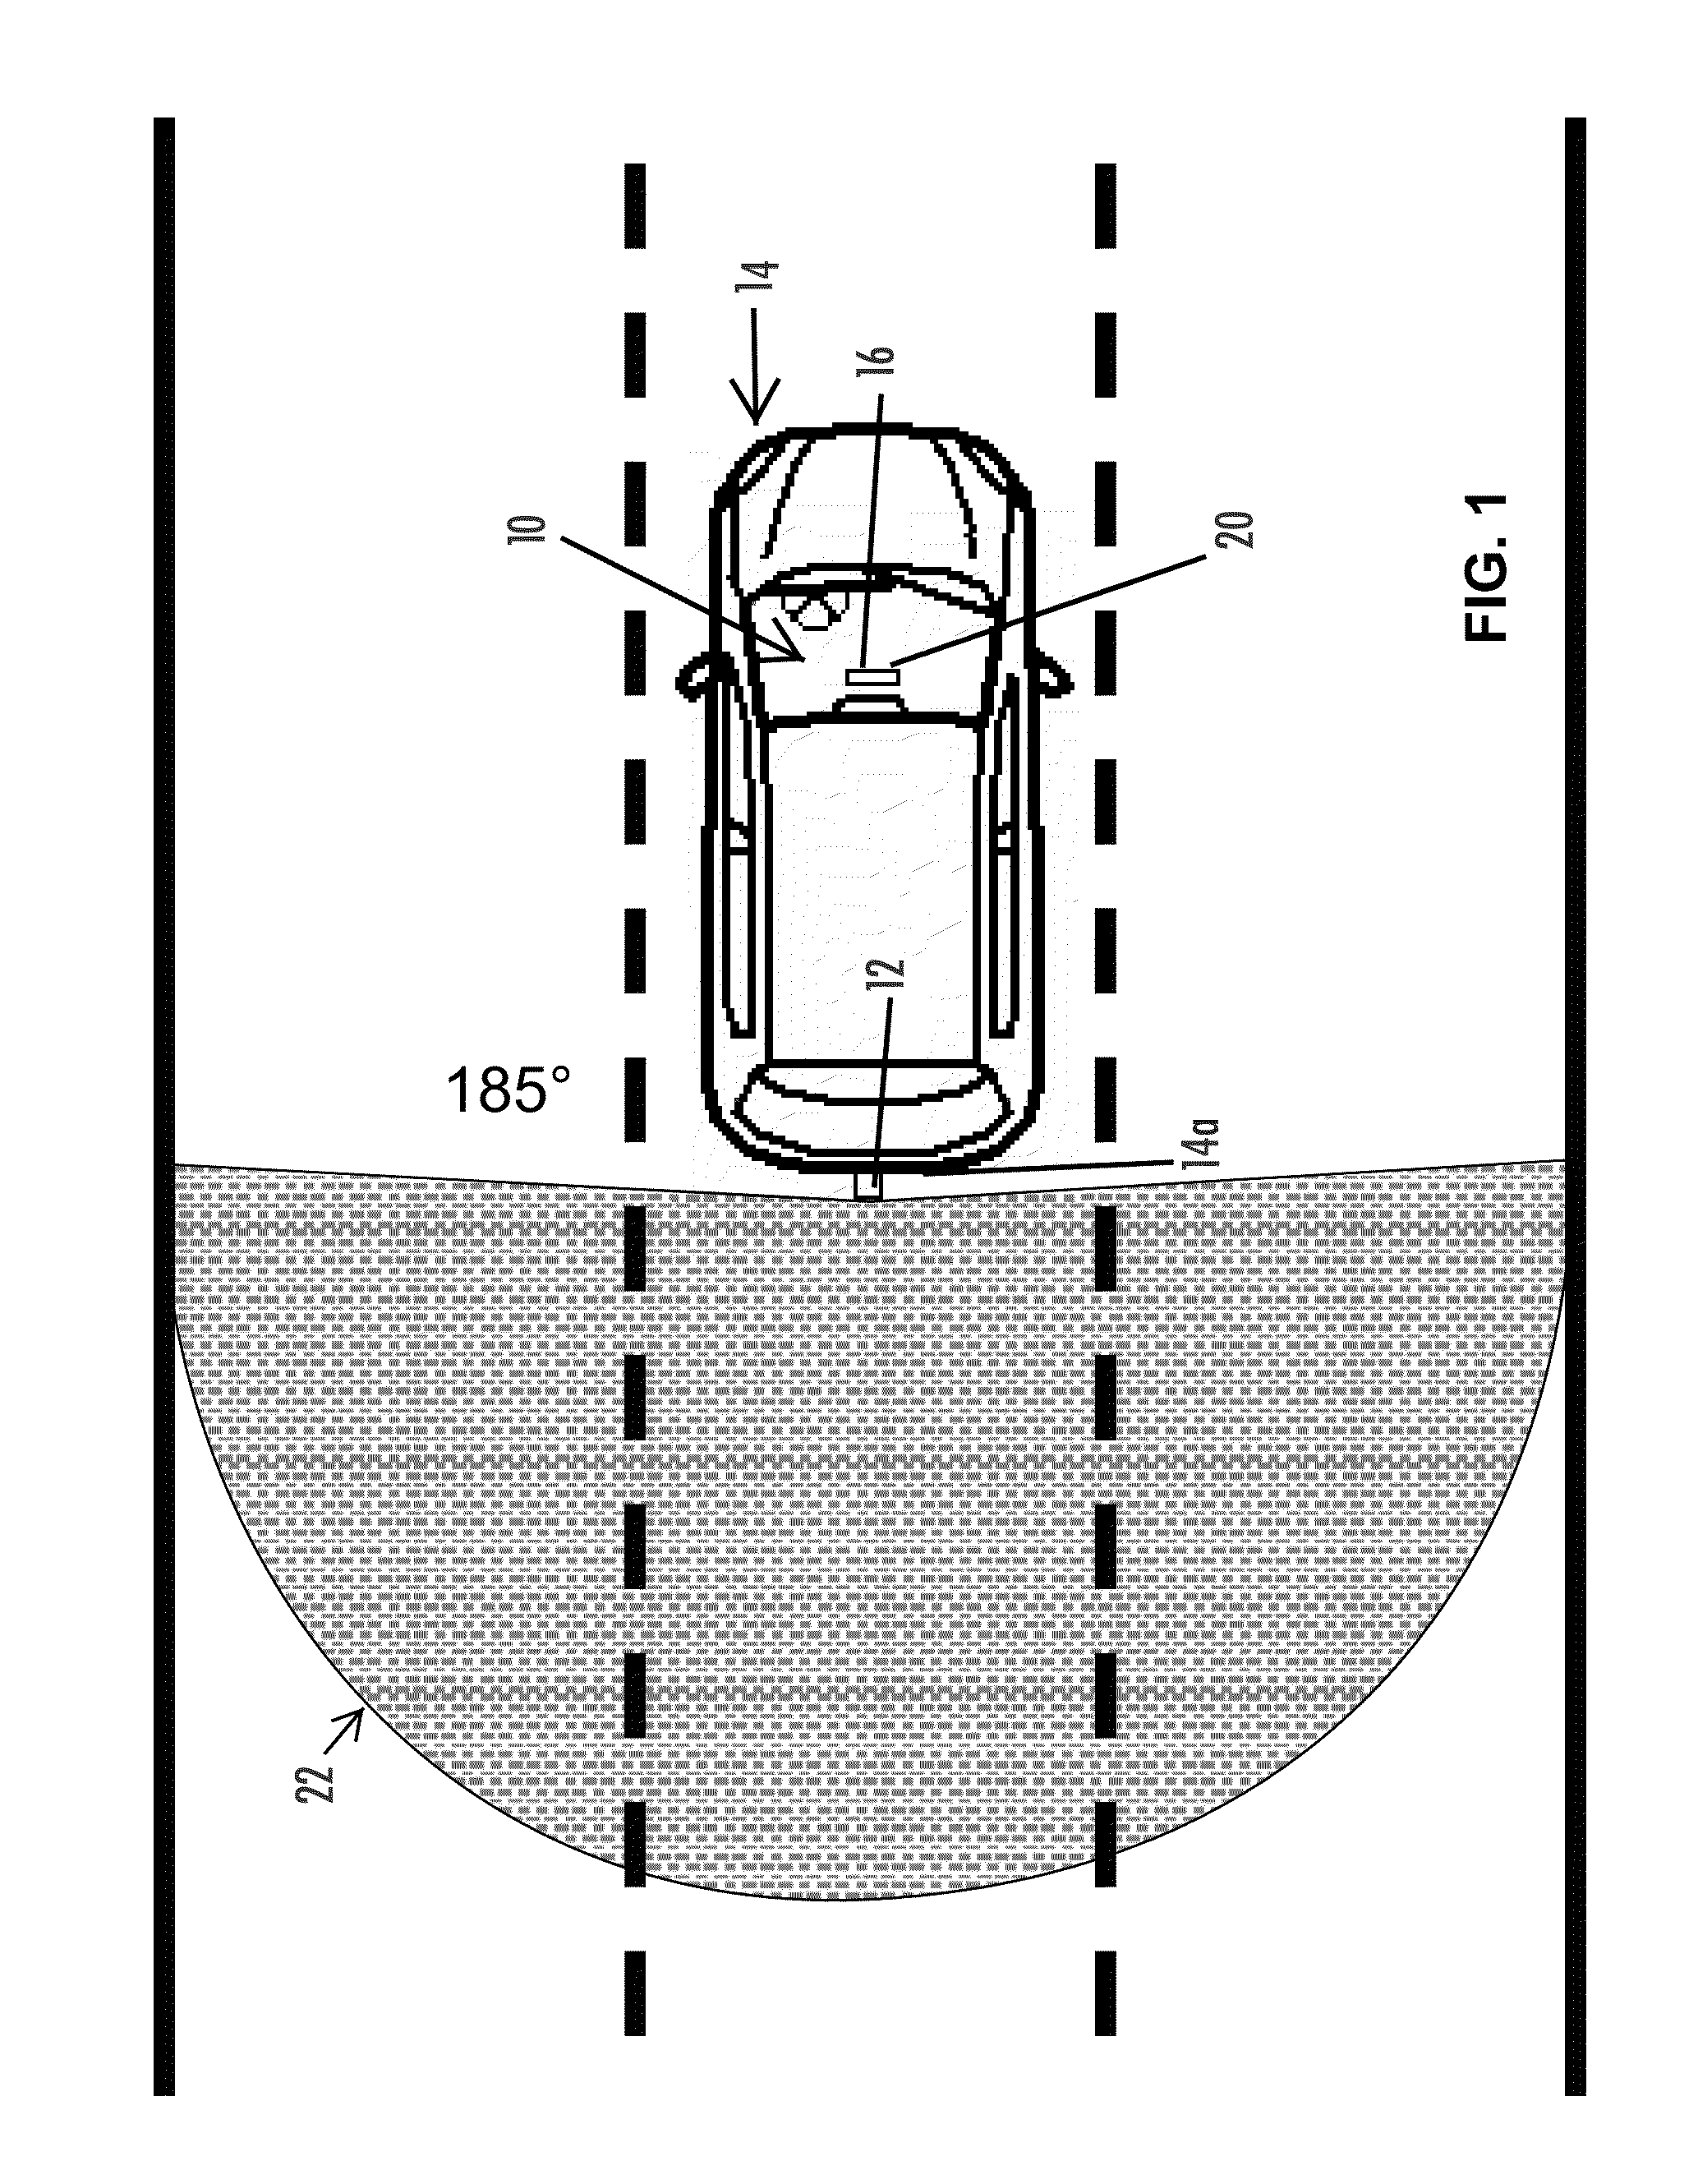 Imaging and display system for vehicle